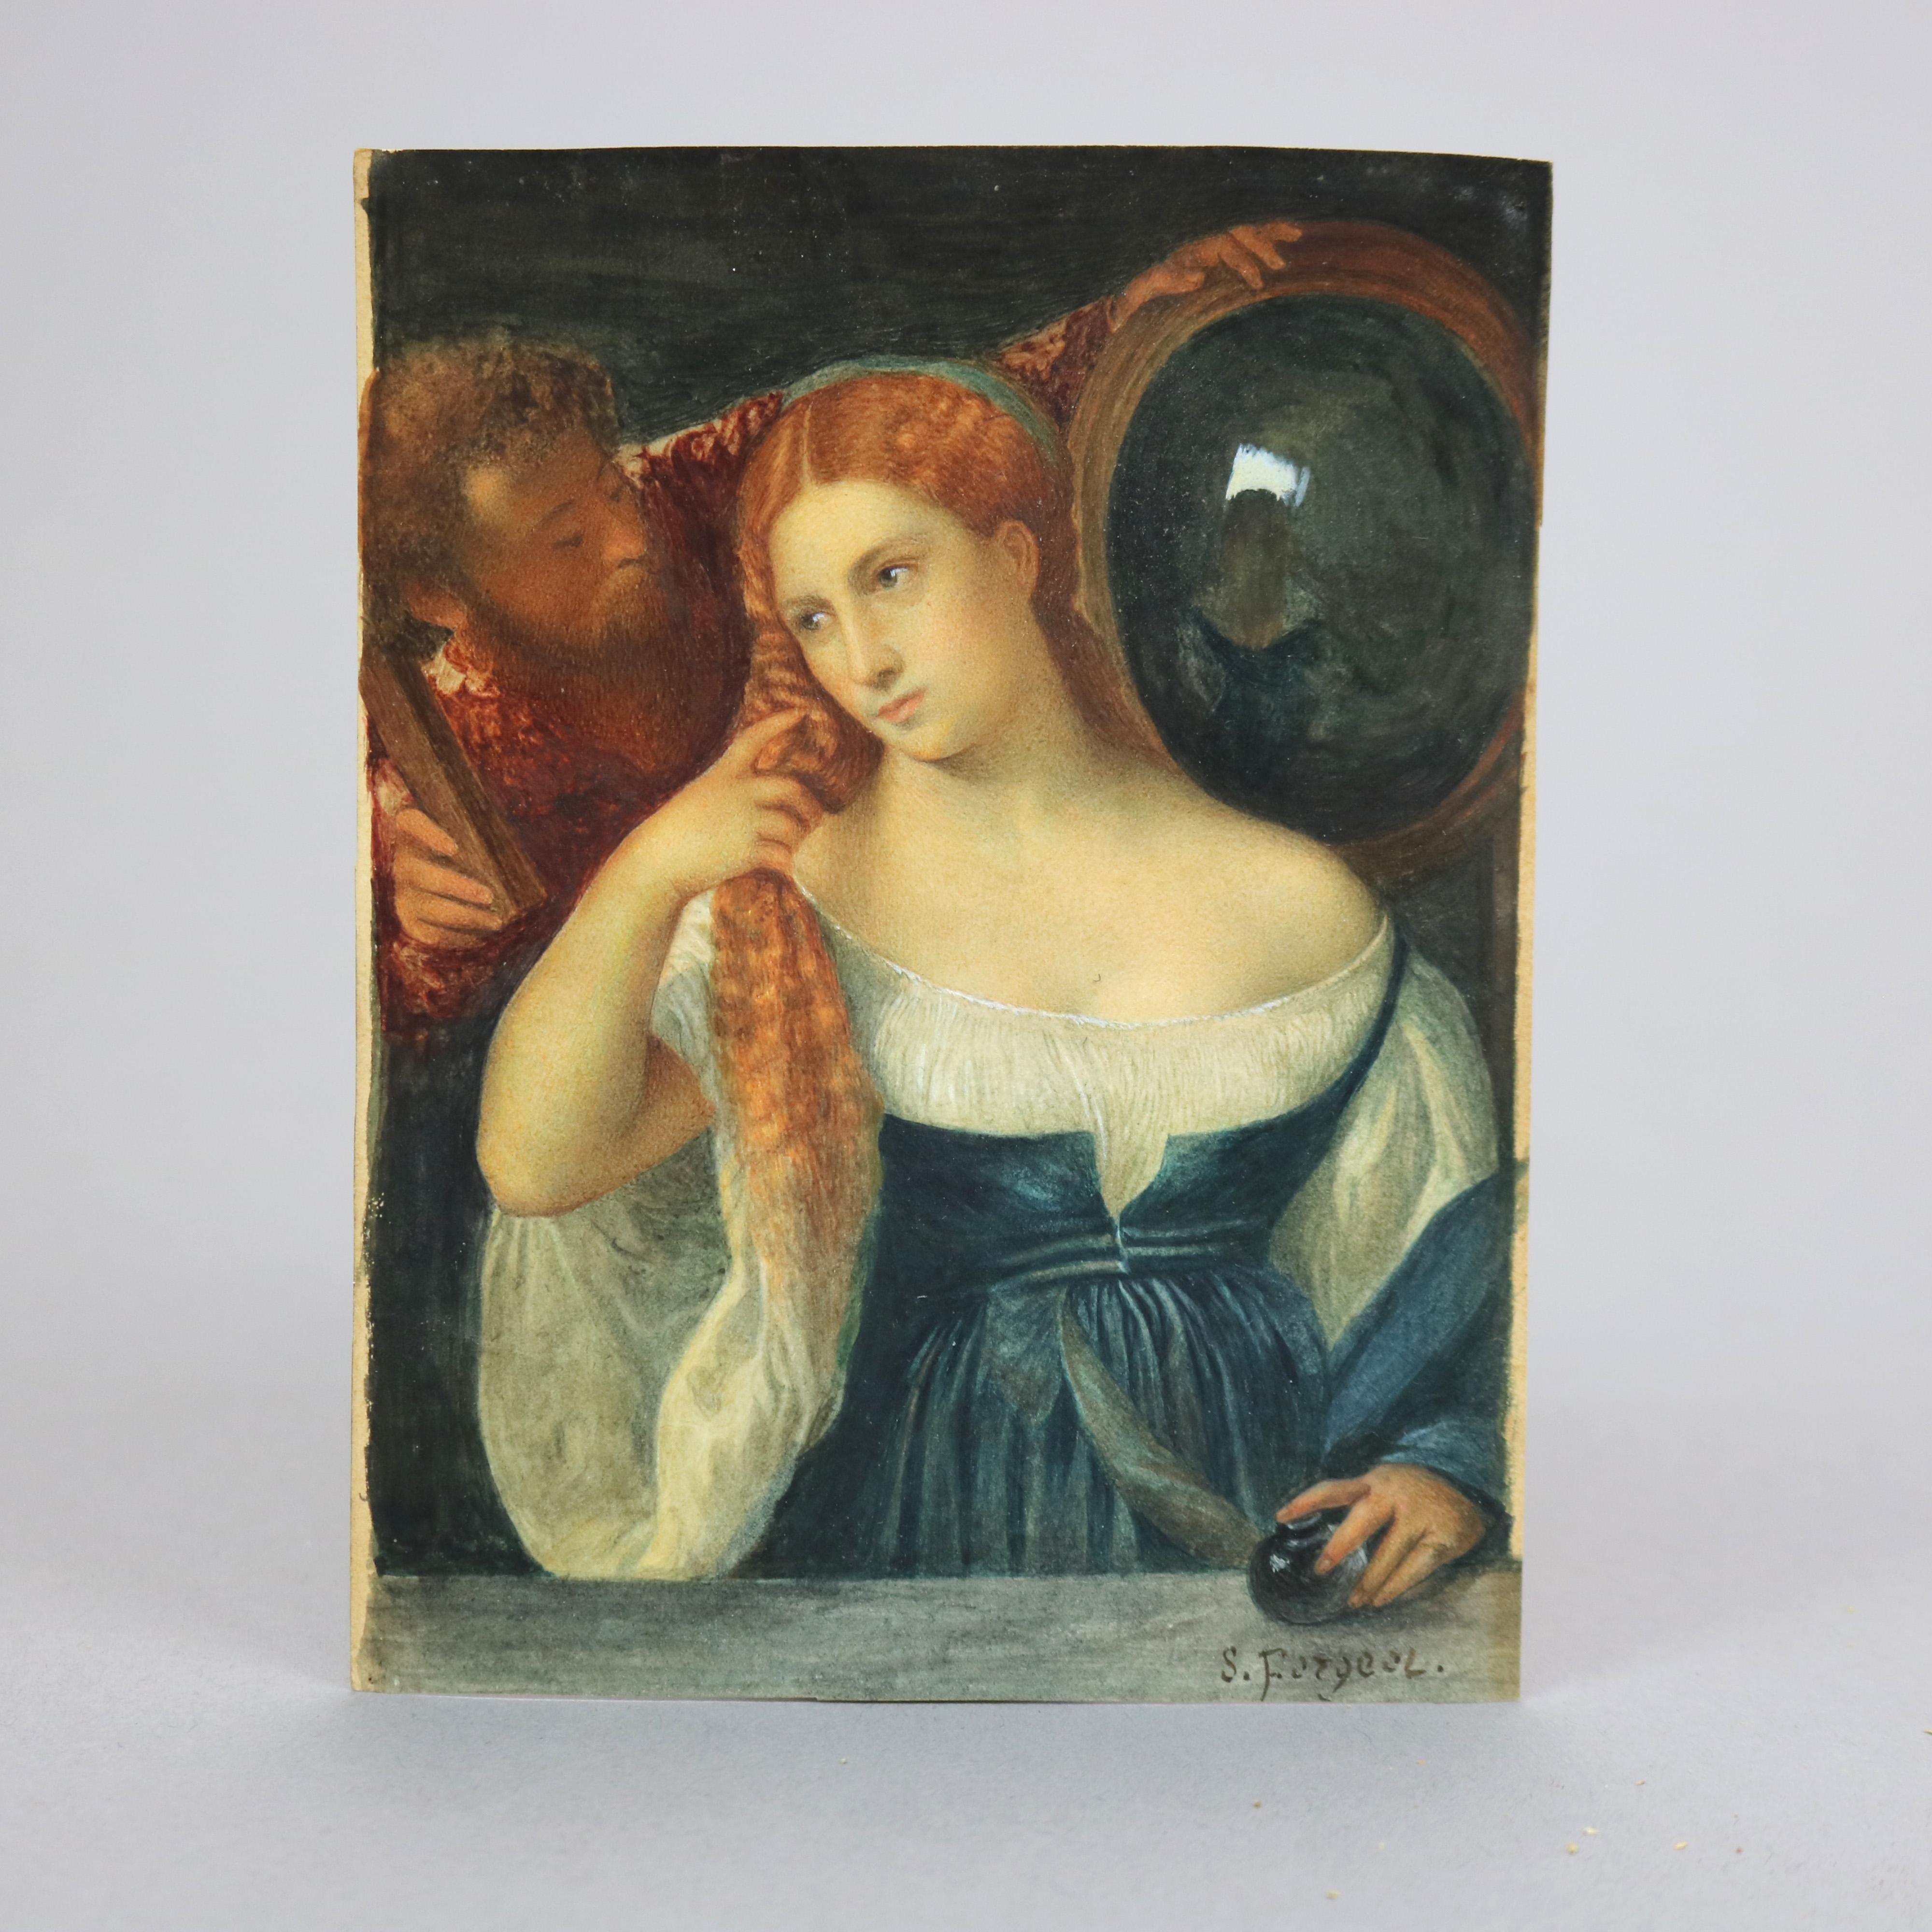 An antique French miniature watercolor painting by S. Forgcol offers portrait of woman with her dressing attendant holding mirror, artist signed lower right, 19th century

Measures - 6.25''h x 5.75''w x .75''d.